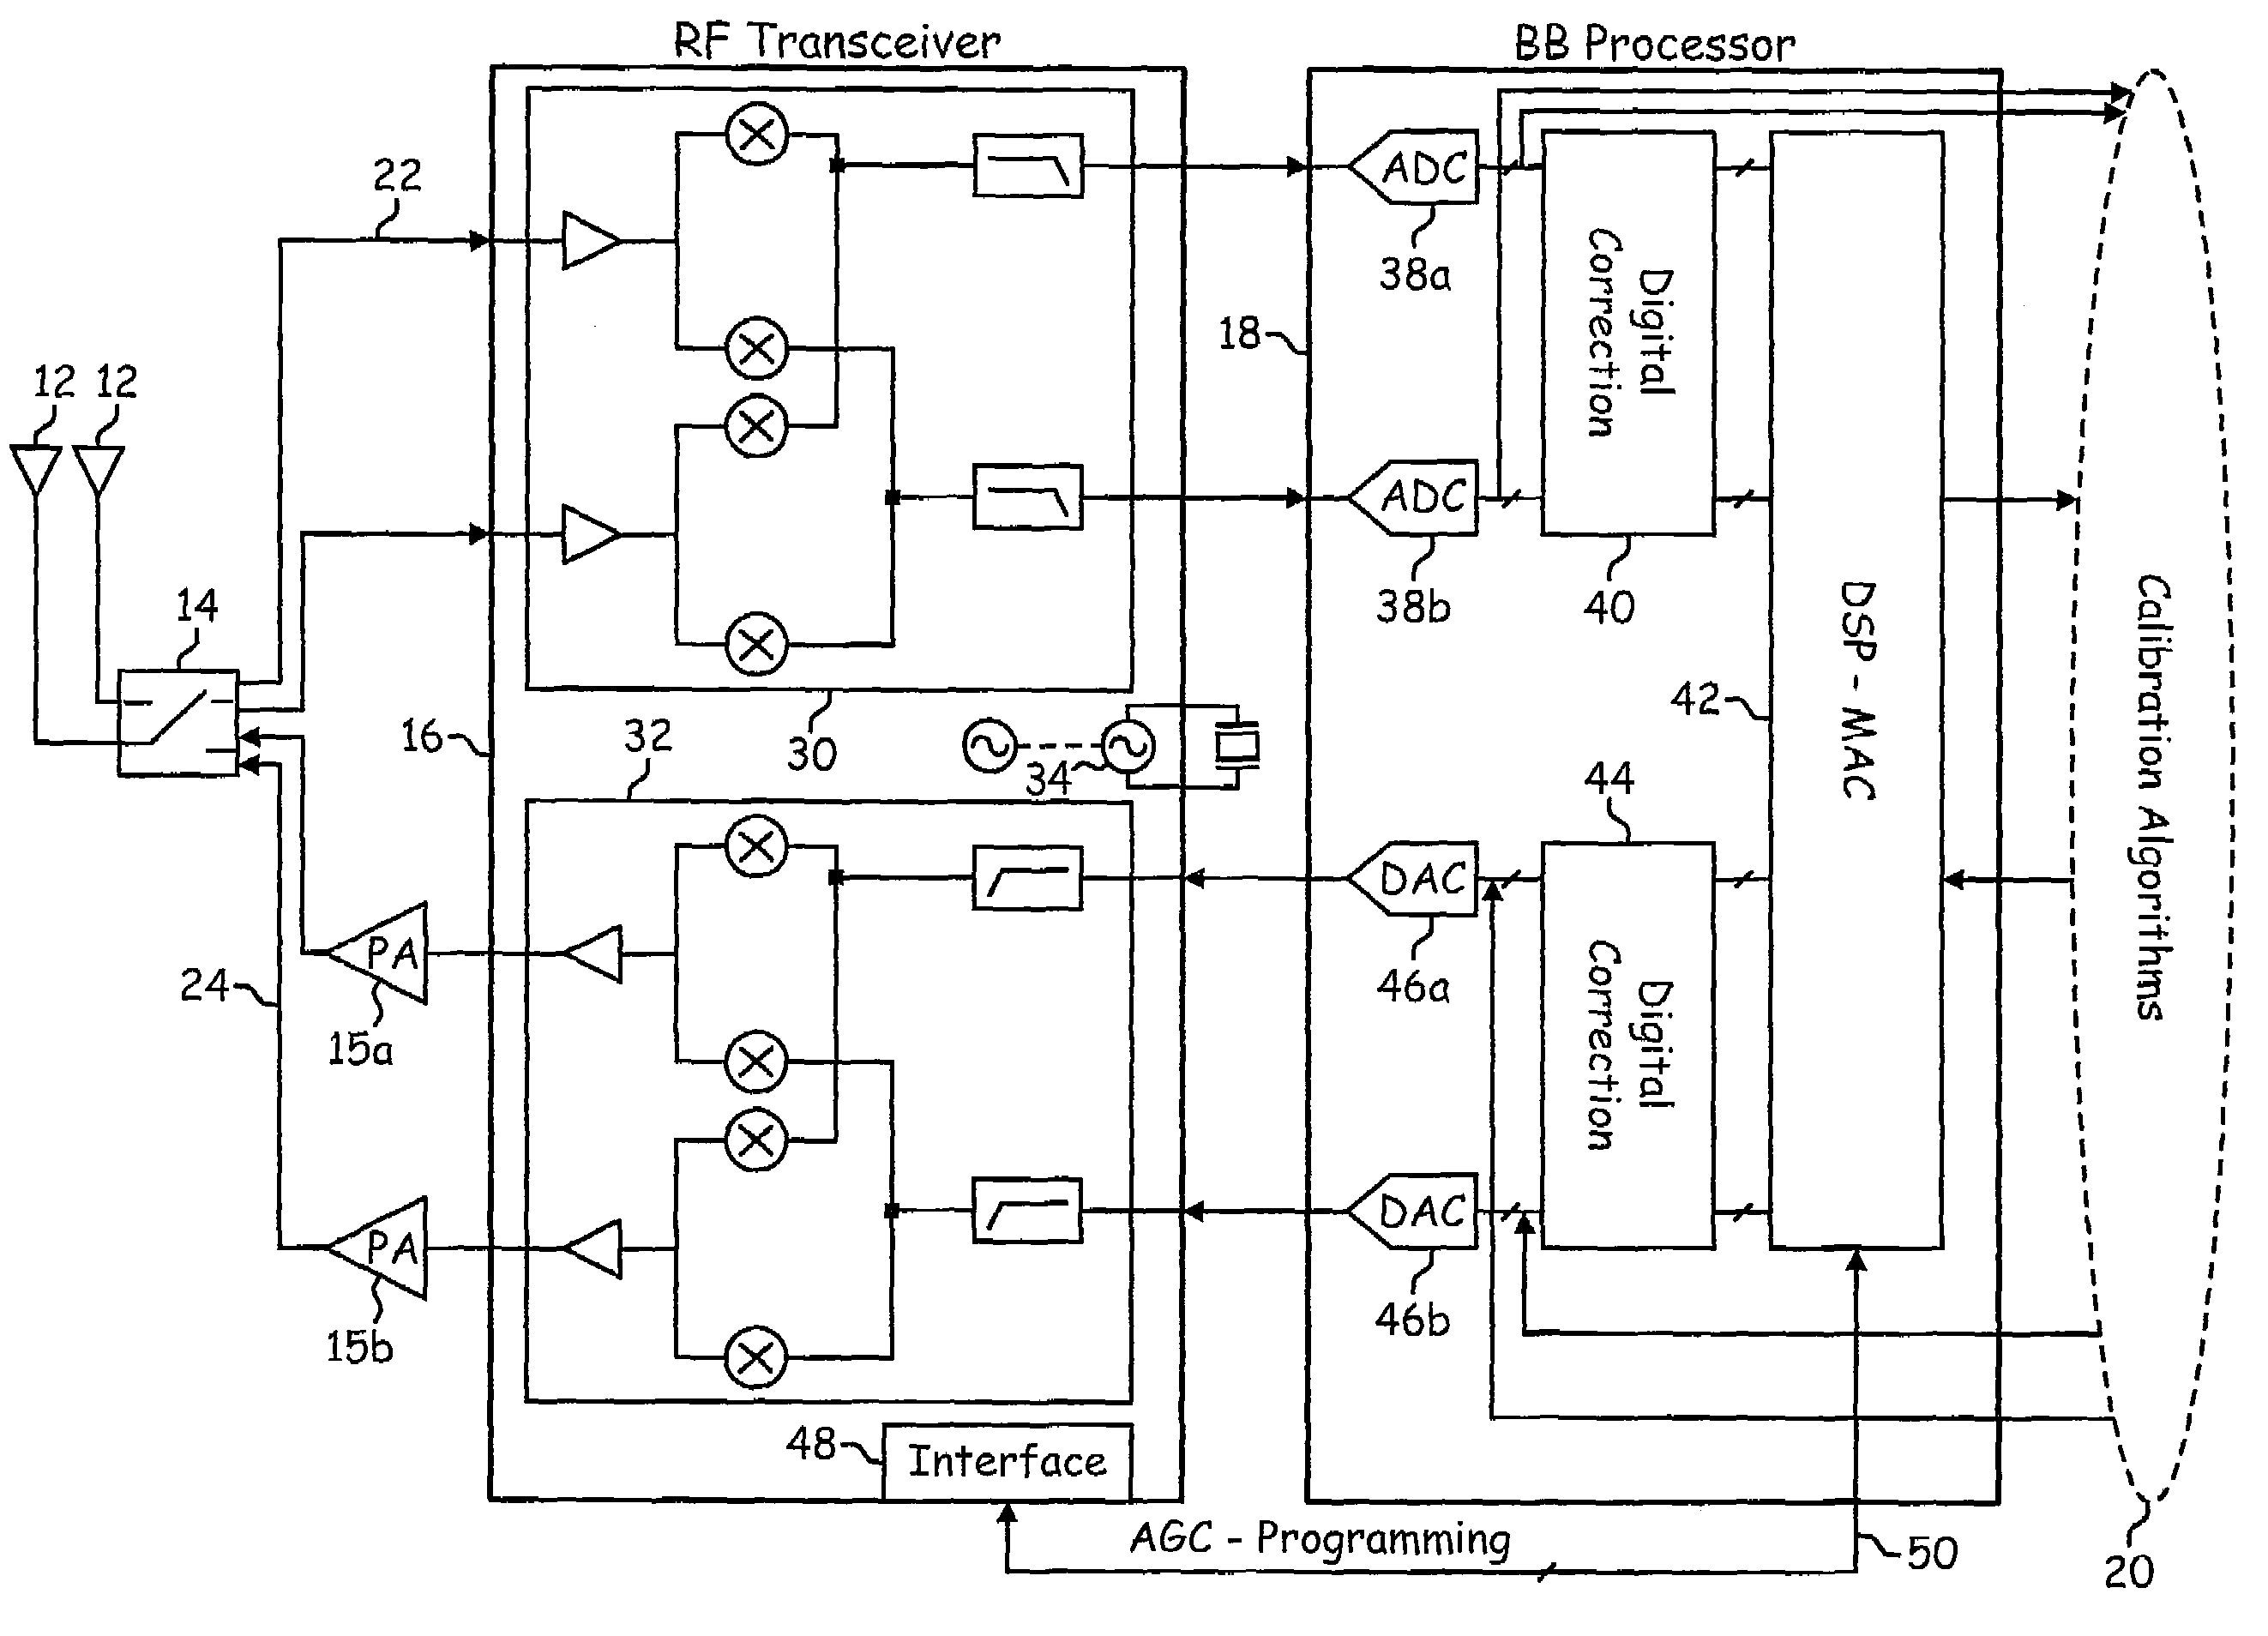 Modified dual band direct conversion architecture that allows extensive digital calibration